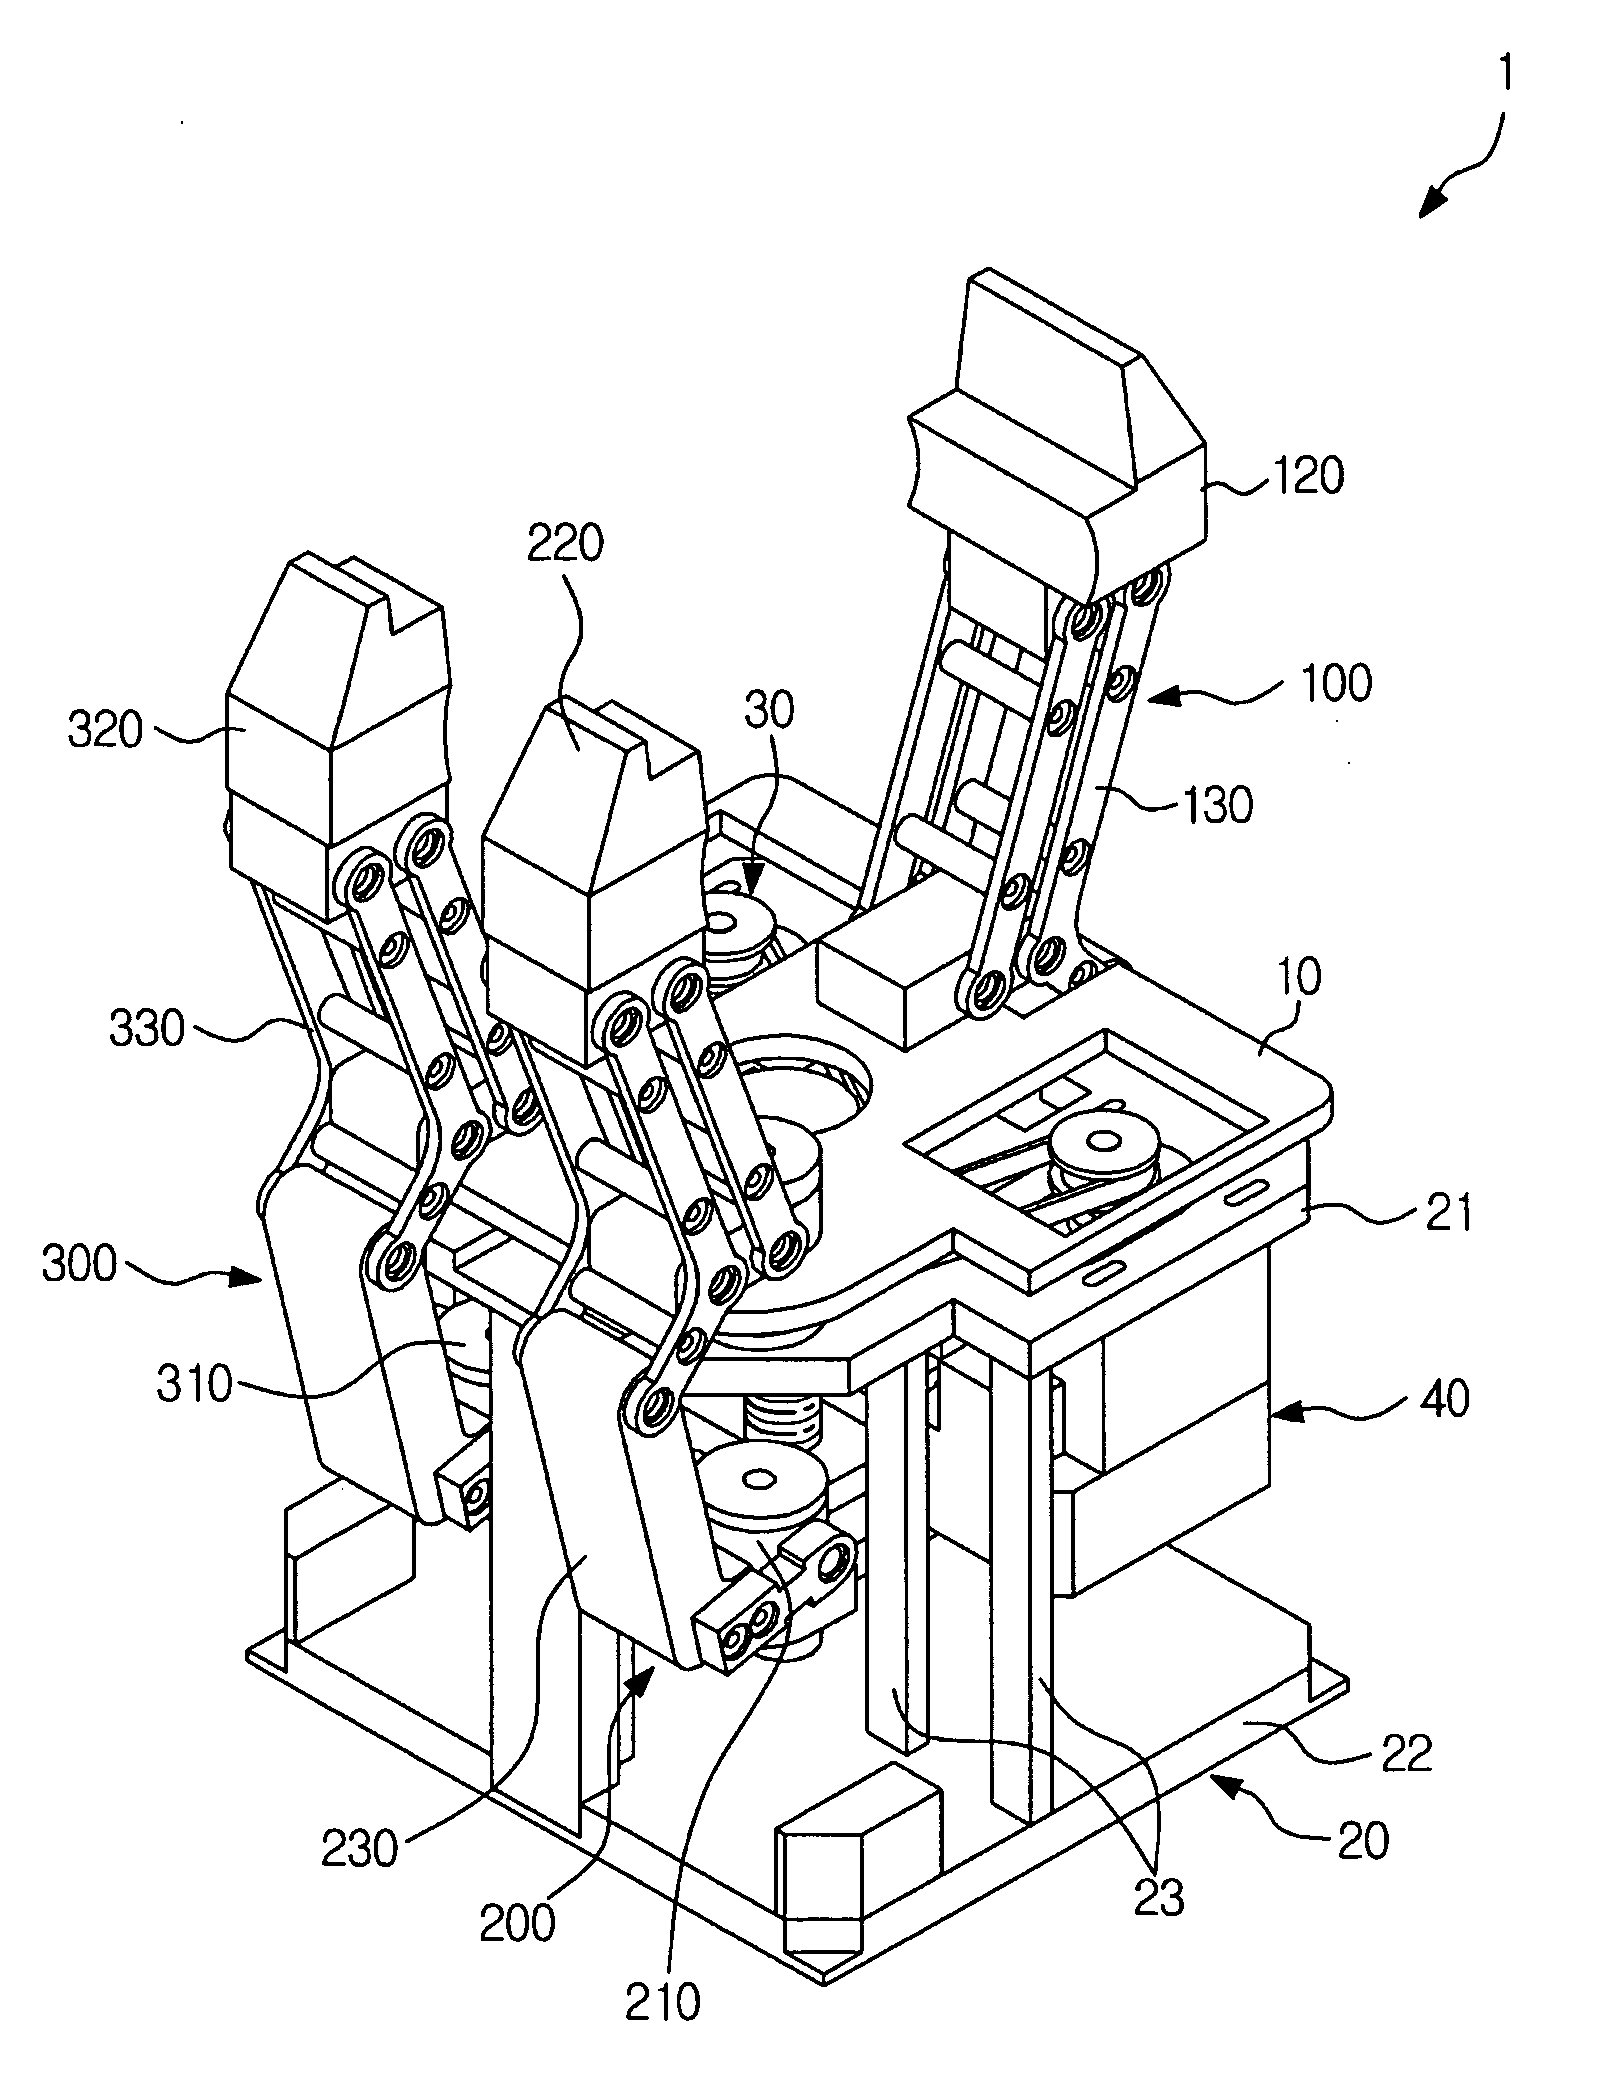 Industrial gripper with multiple degrees of freedom